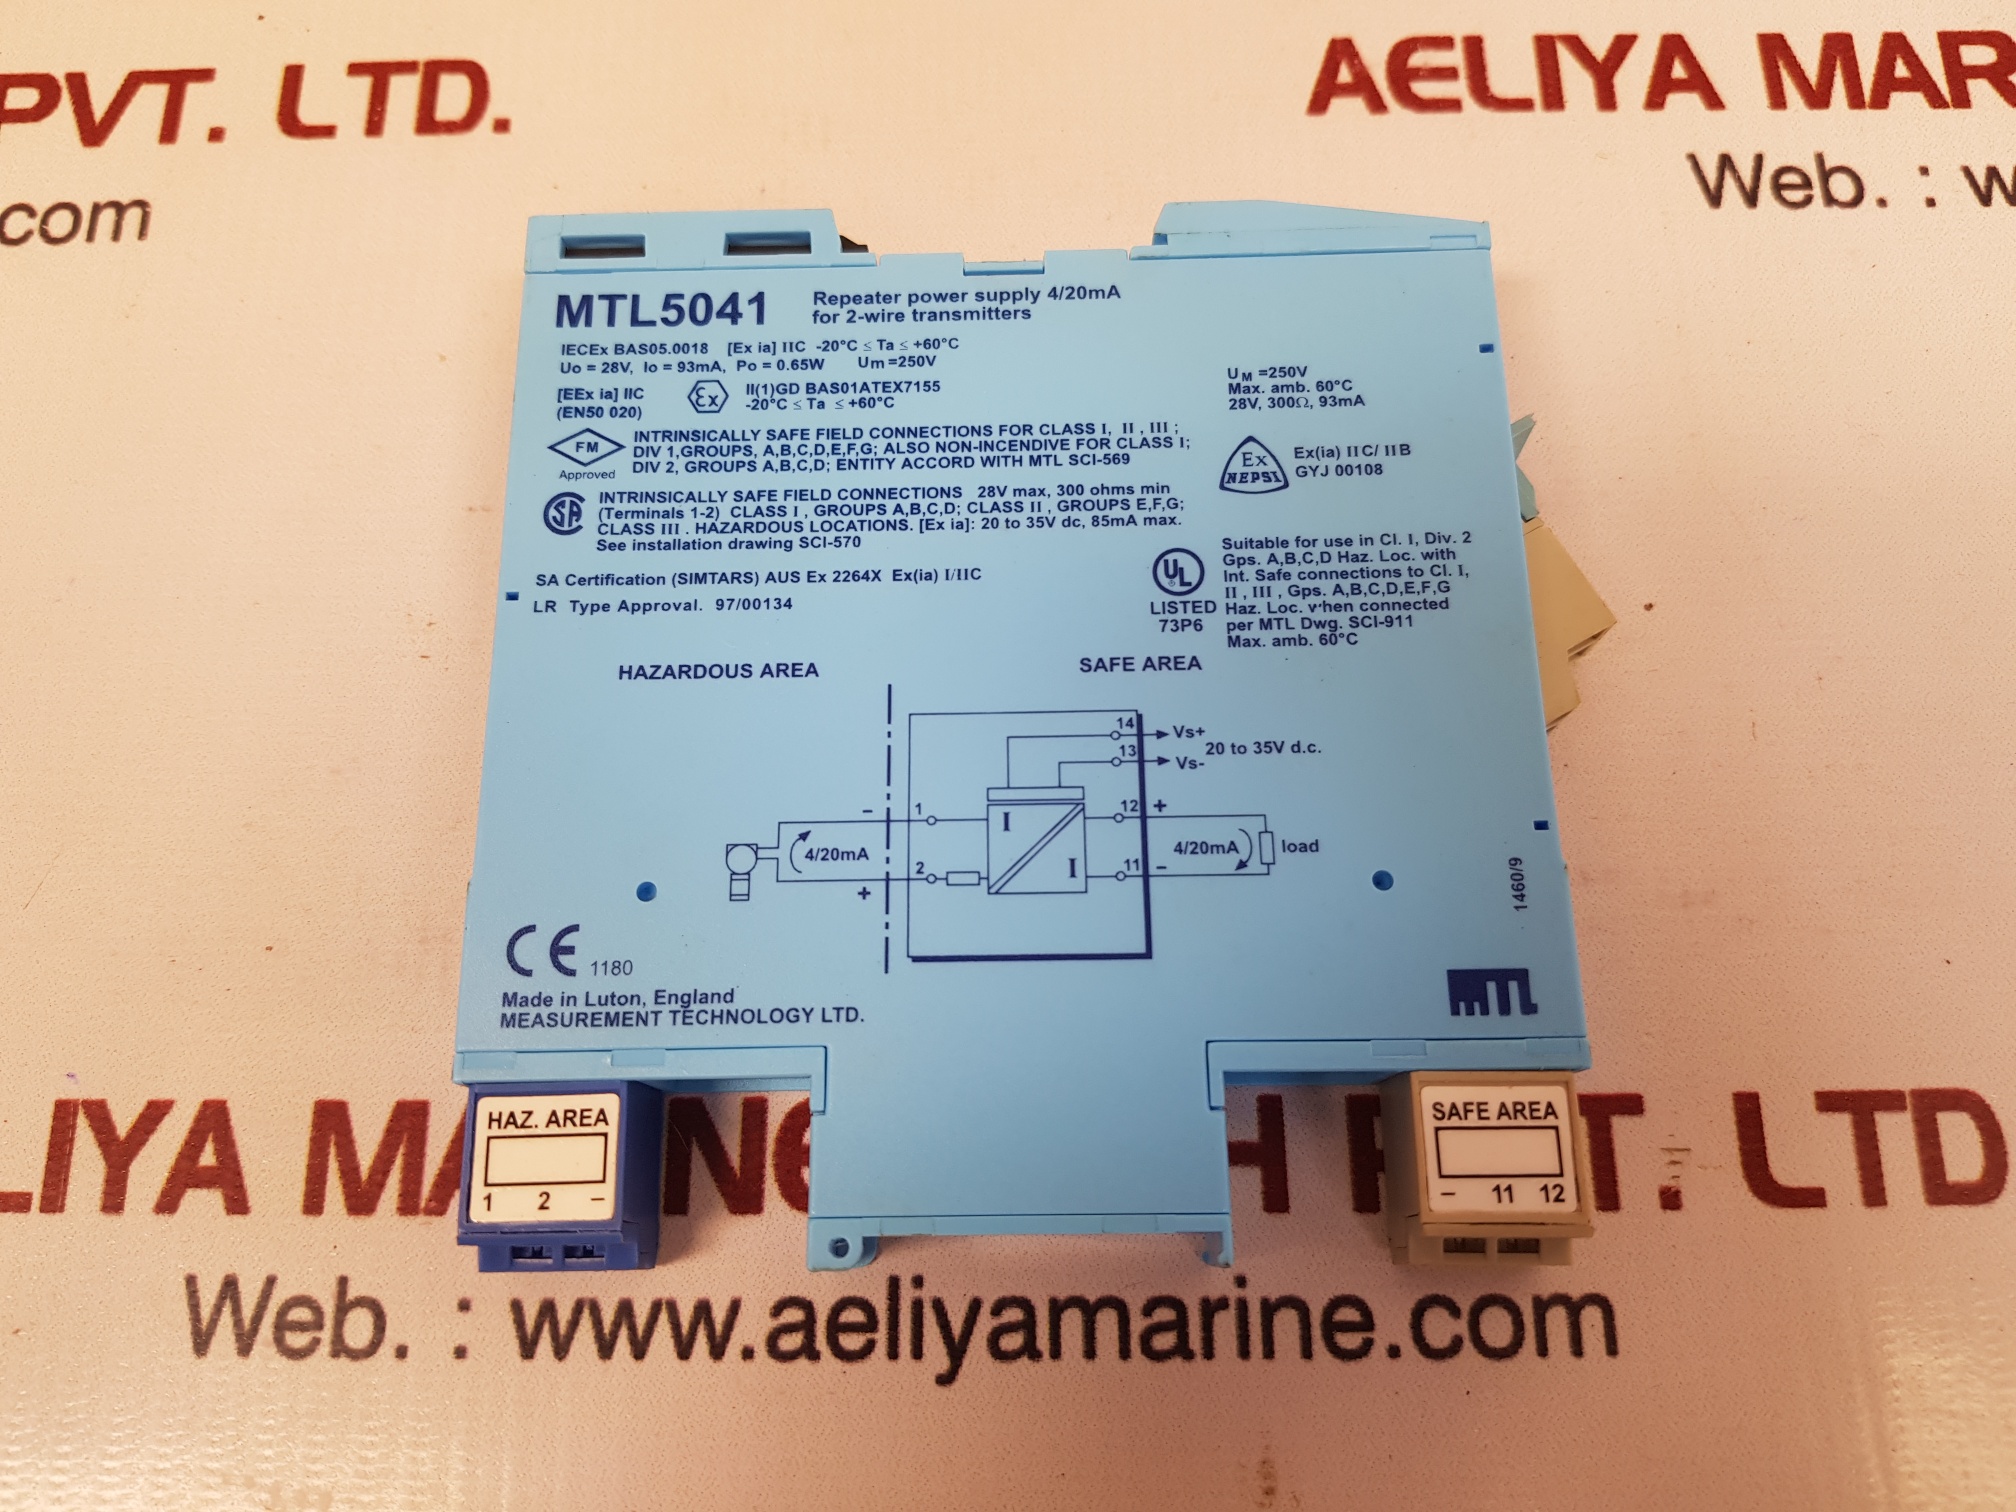 MTL 5041 REPEATER POWER SUPPLY 4/20 MA